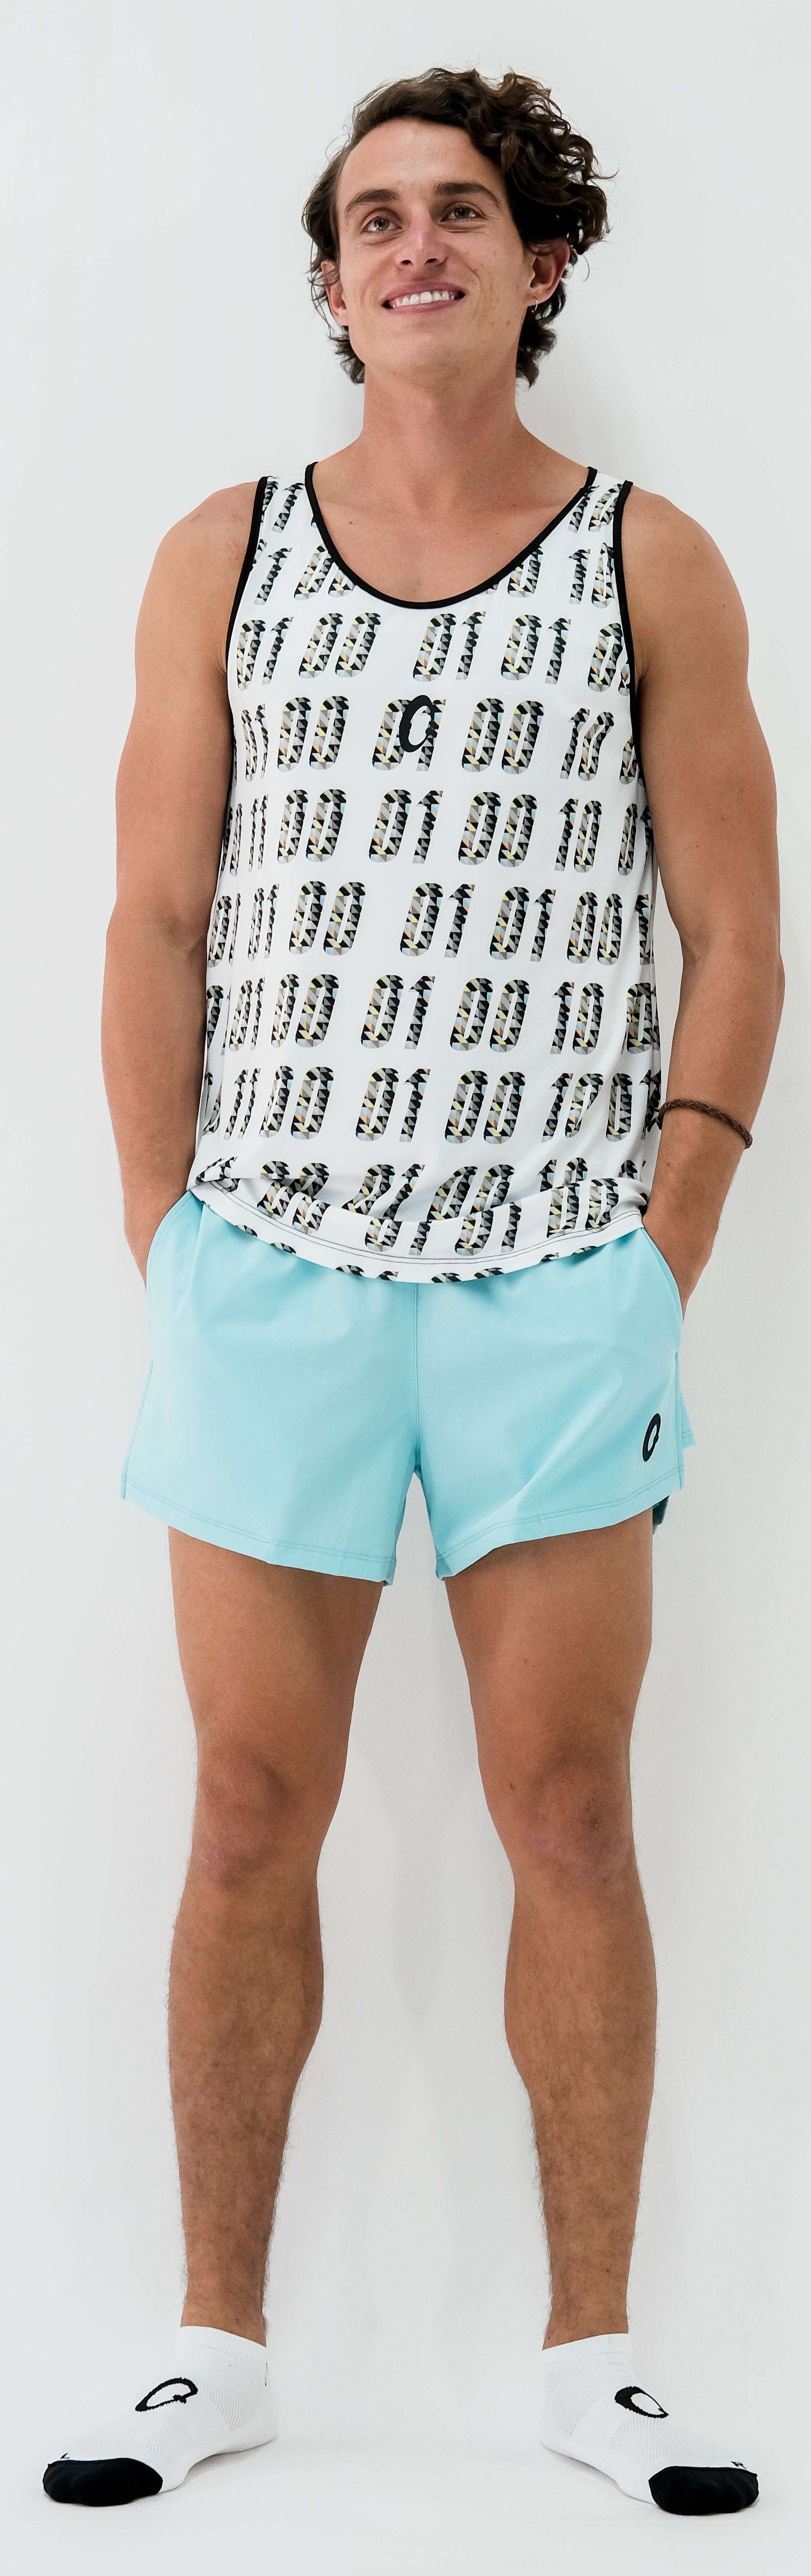 Recycled Mint Men's Performance Short